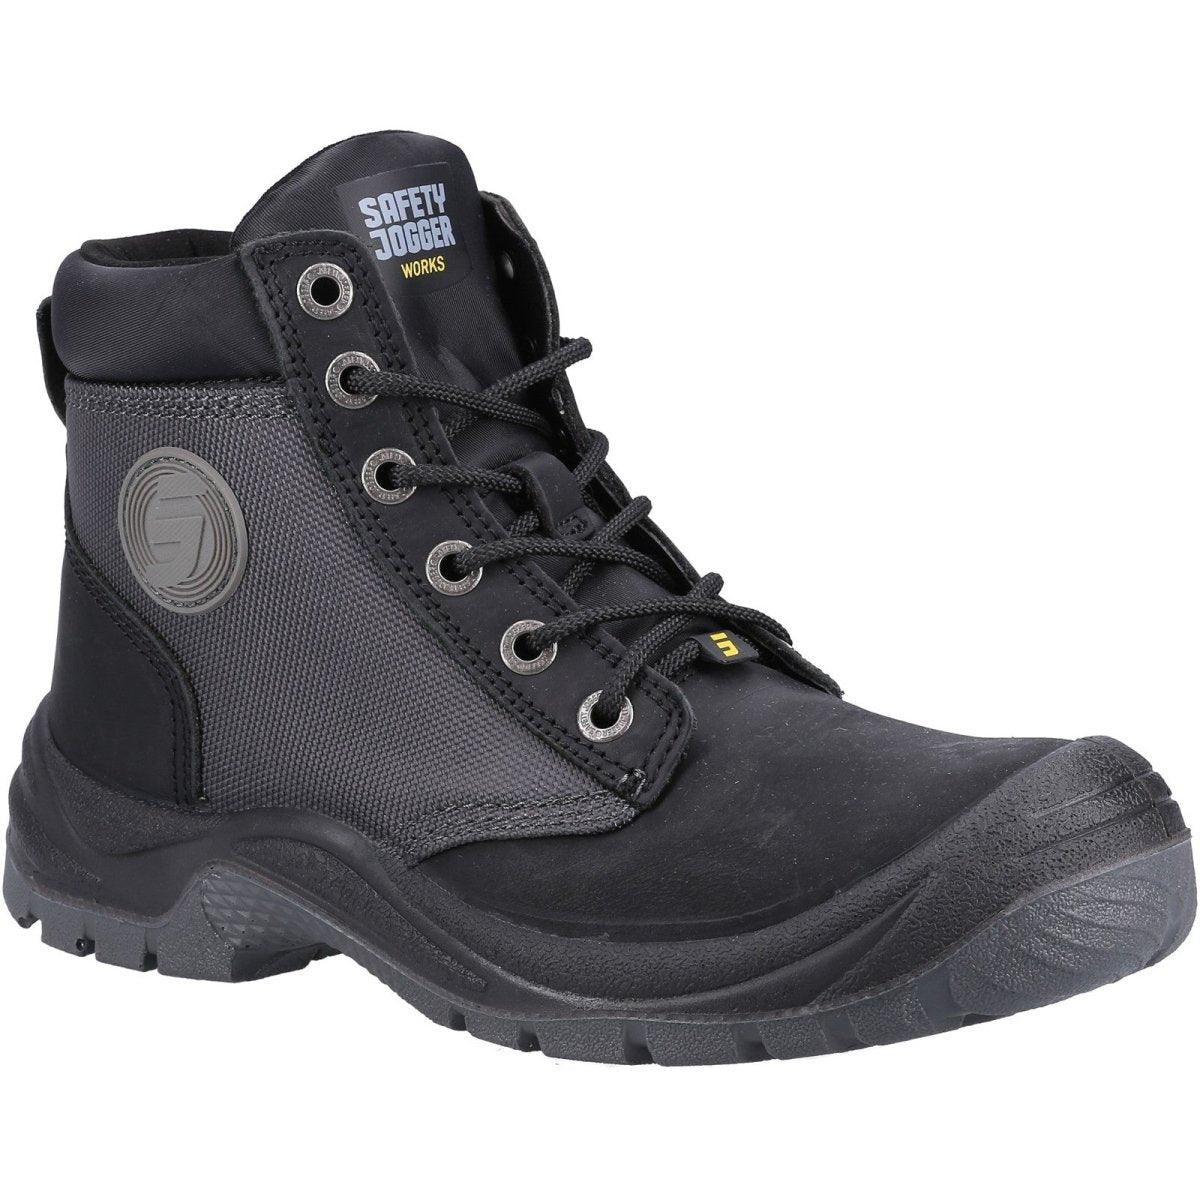 Safety Jogger Dakar S3 Steel Toe & Midsole Mens Safety Boots - Shoe Store Direct